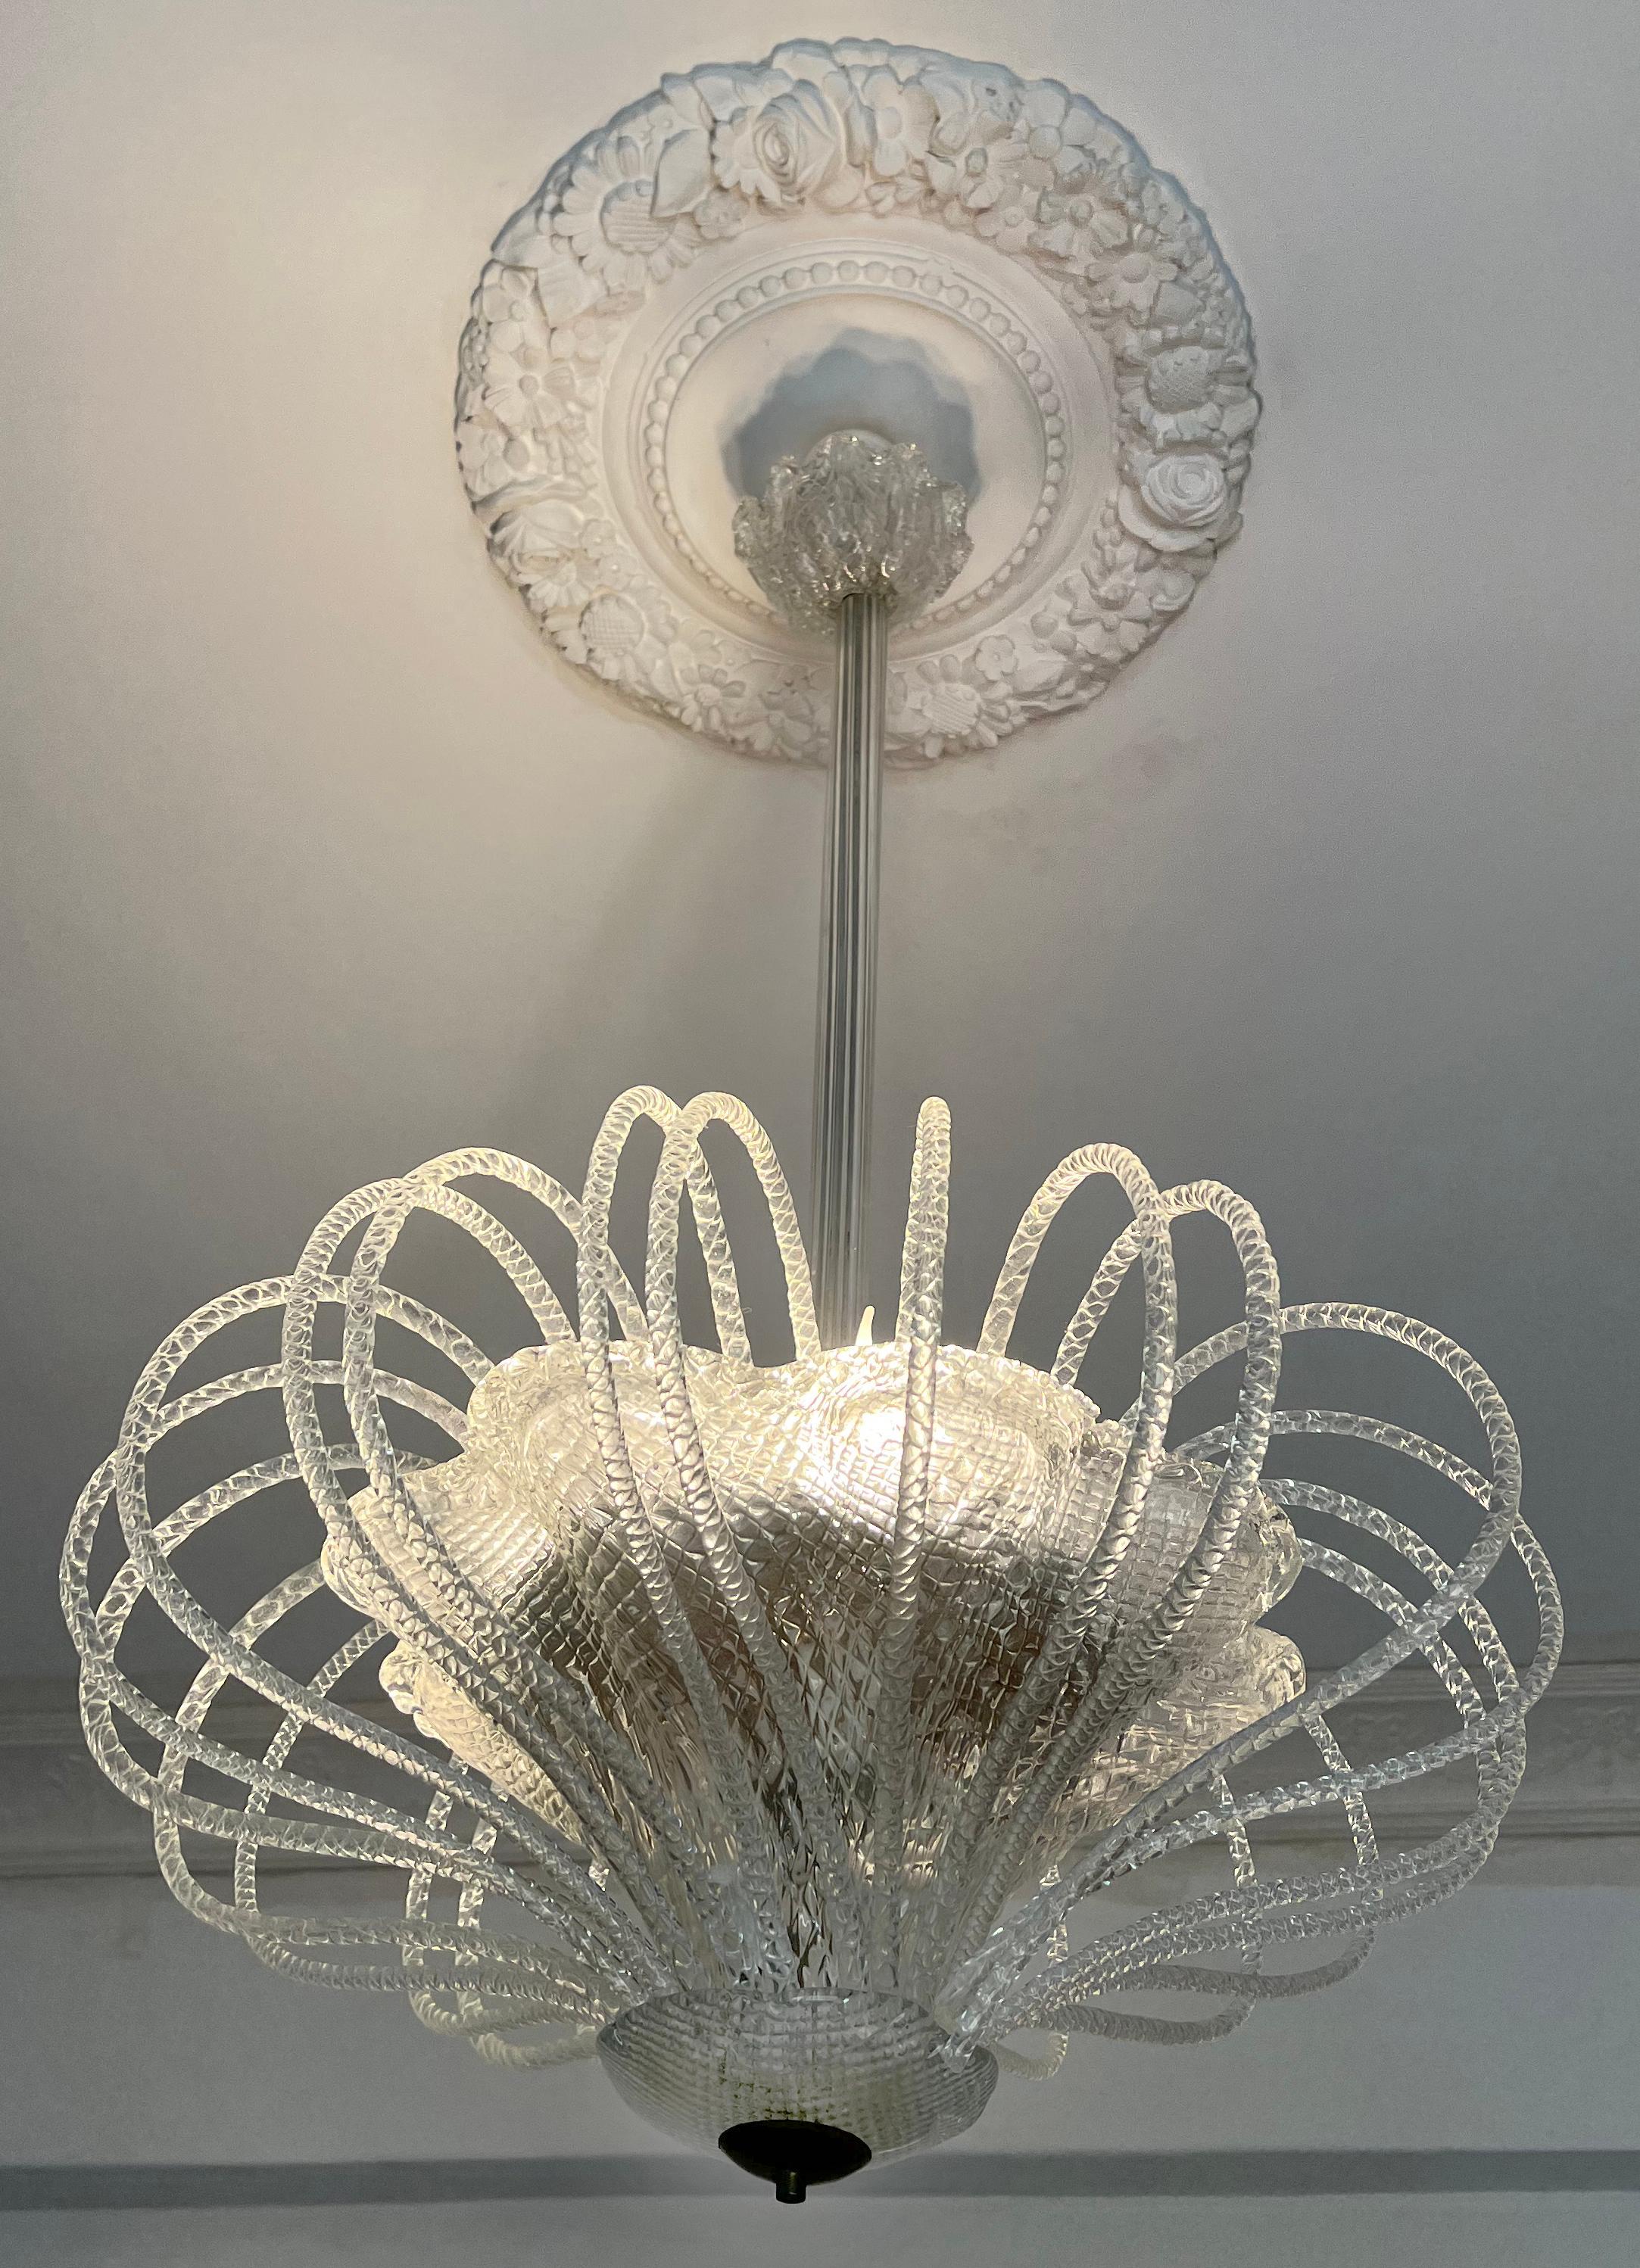 Italian Stunning and Original Chandelier by Barovier & Toso, Murano, 1940s For Sale